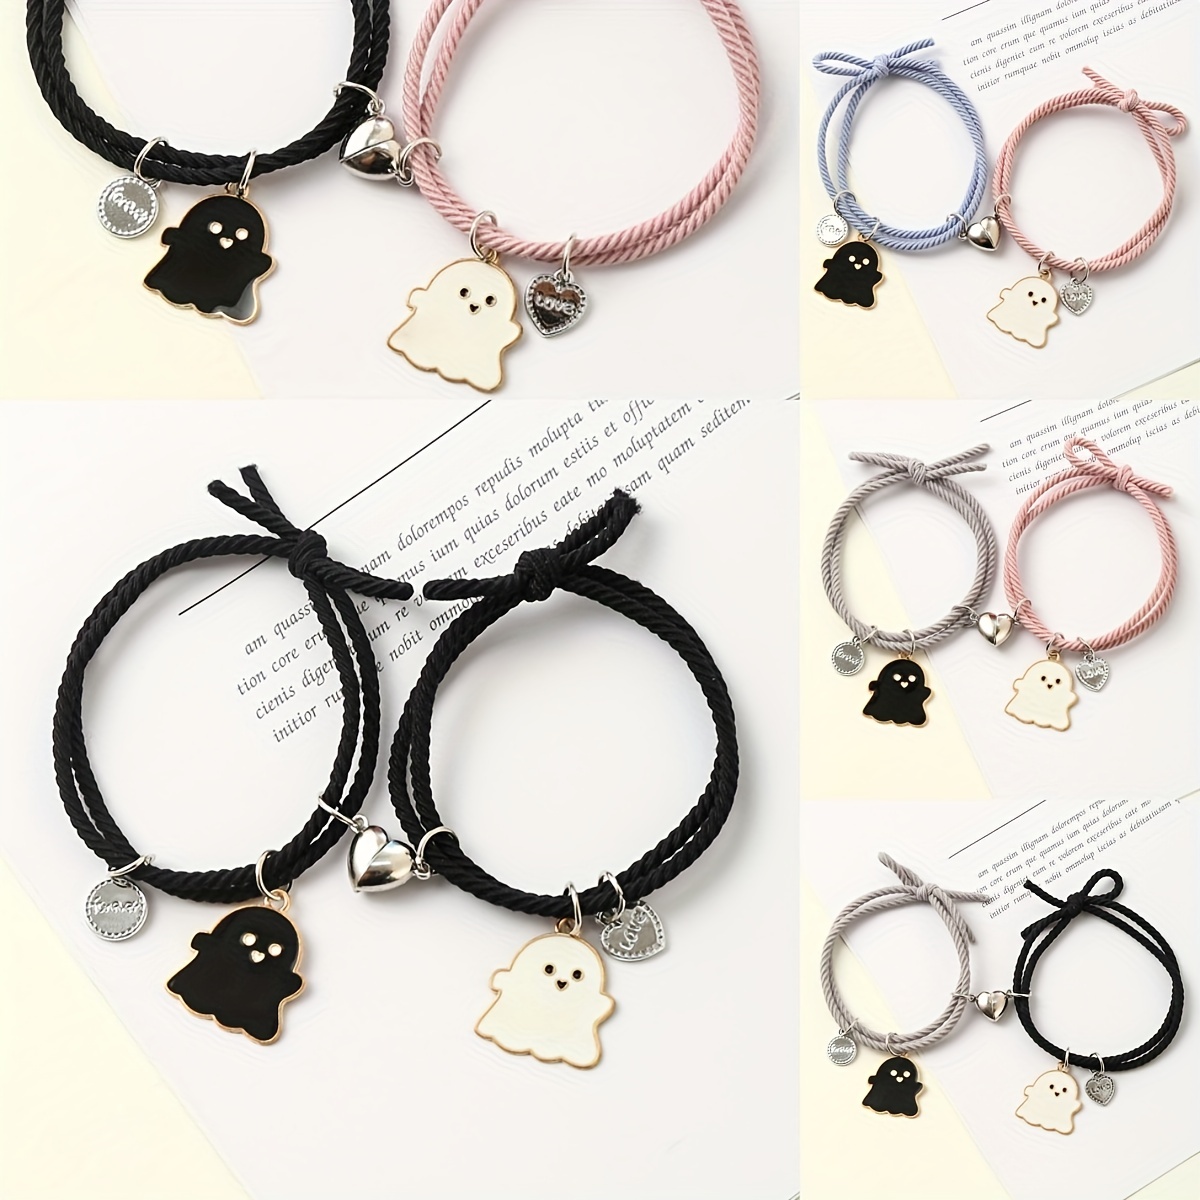 T-Hot Couple Bracelets Lock and Key Matching Bracelets for Him and Her Best Friends 2pcs Jewelry Sets Love Friendship Bracelets Gift, Optional Color